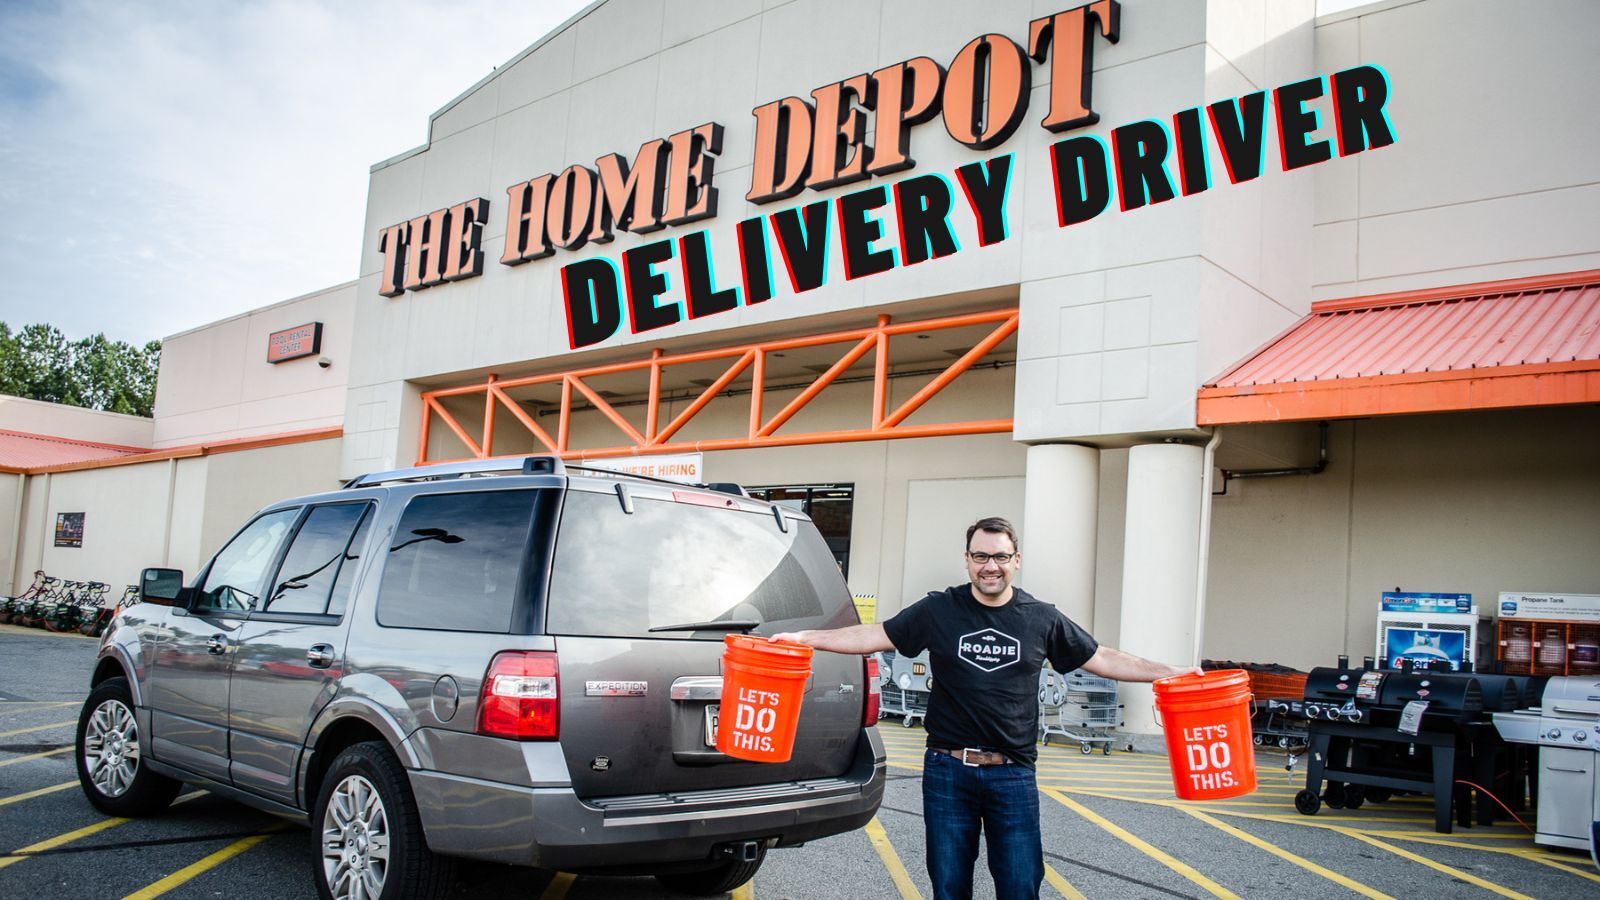 Home Depot Delivery Driver: Something You Might Be Interested In